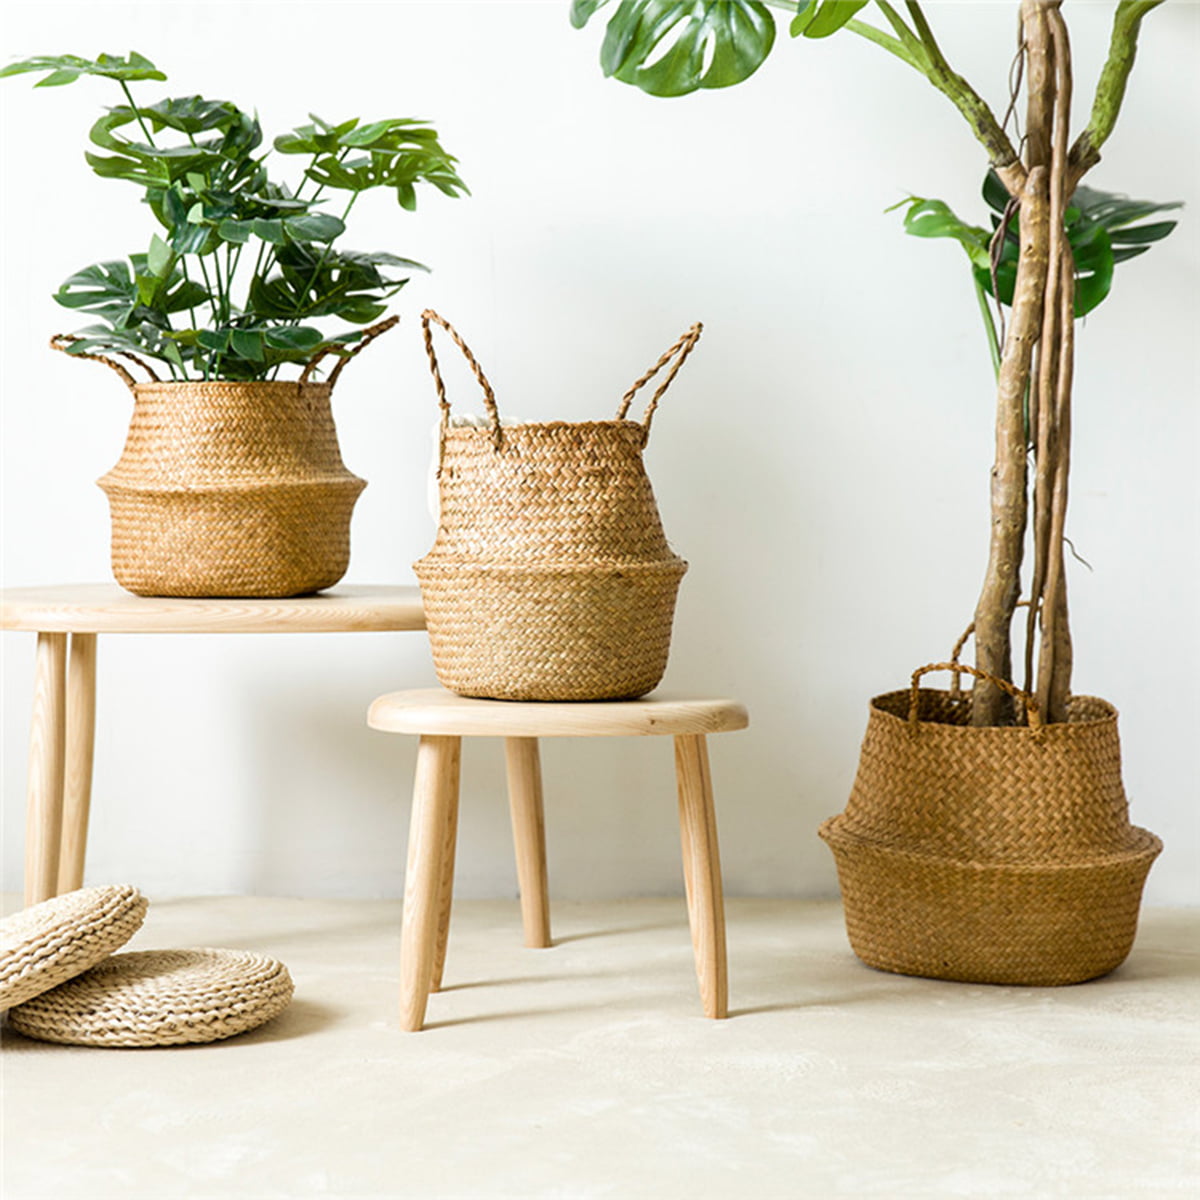 BlueMake Woven Seagrass Belly Basket for Storage Plant Pot Basket and Laundry, 